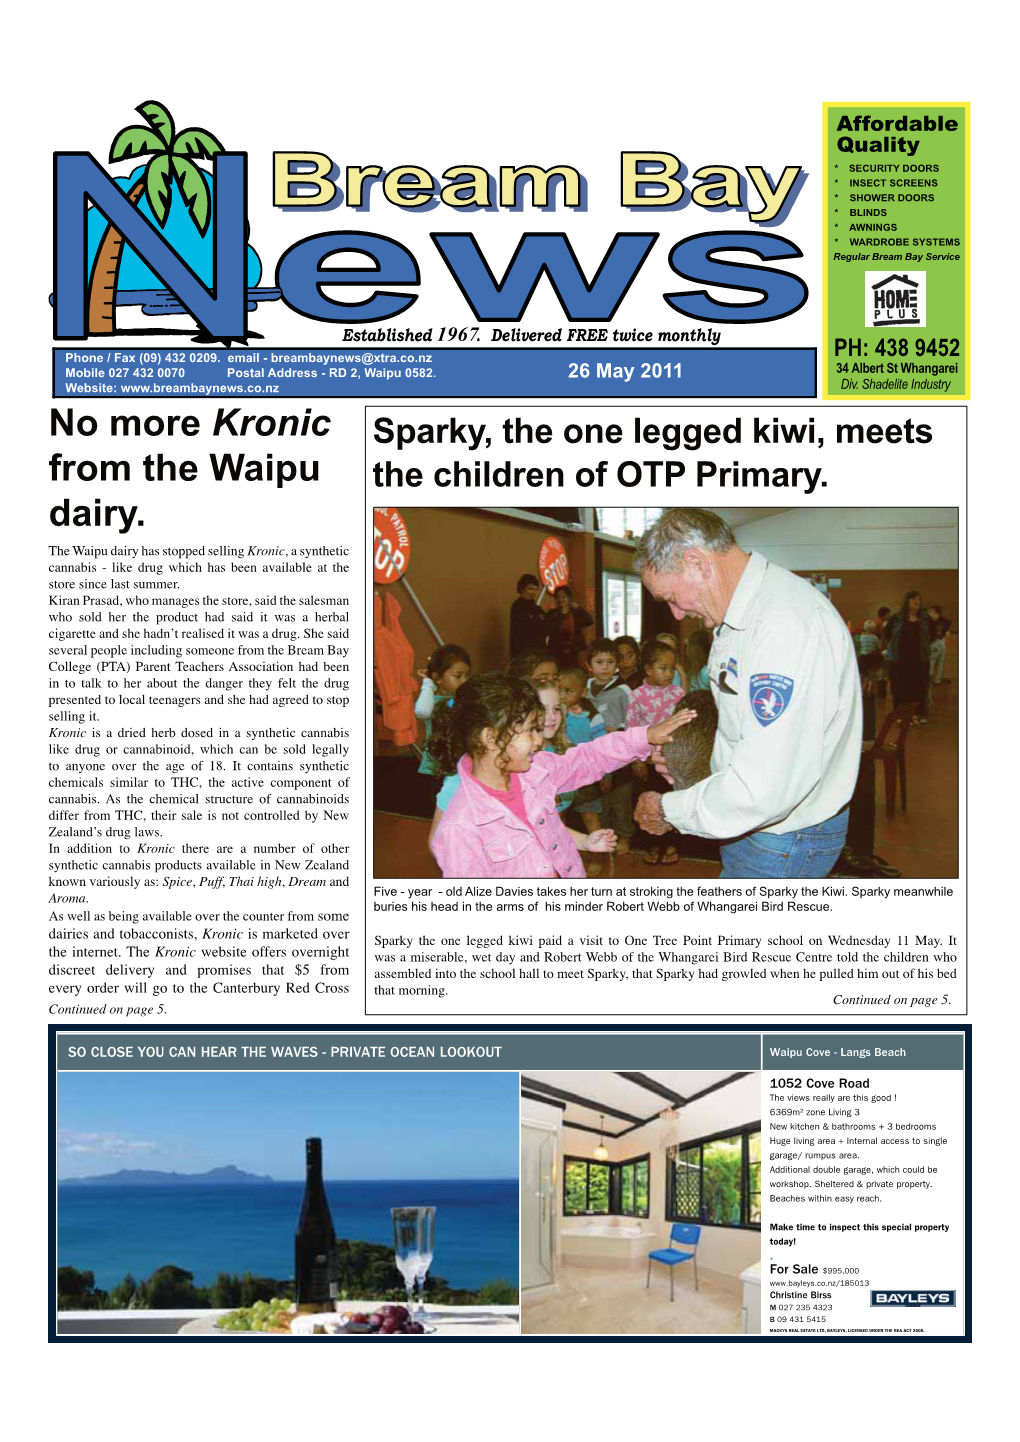 No More Kronic from the Waipu Dairy